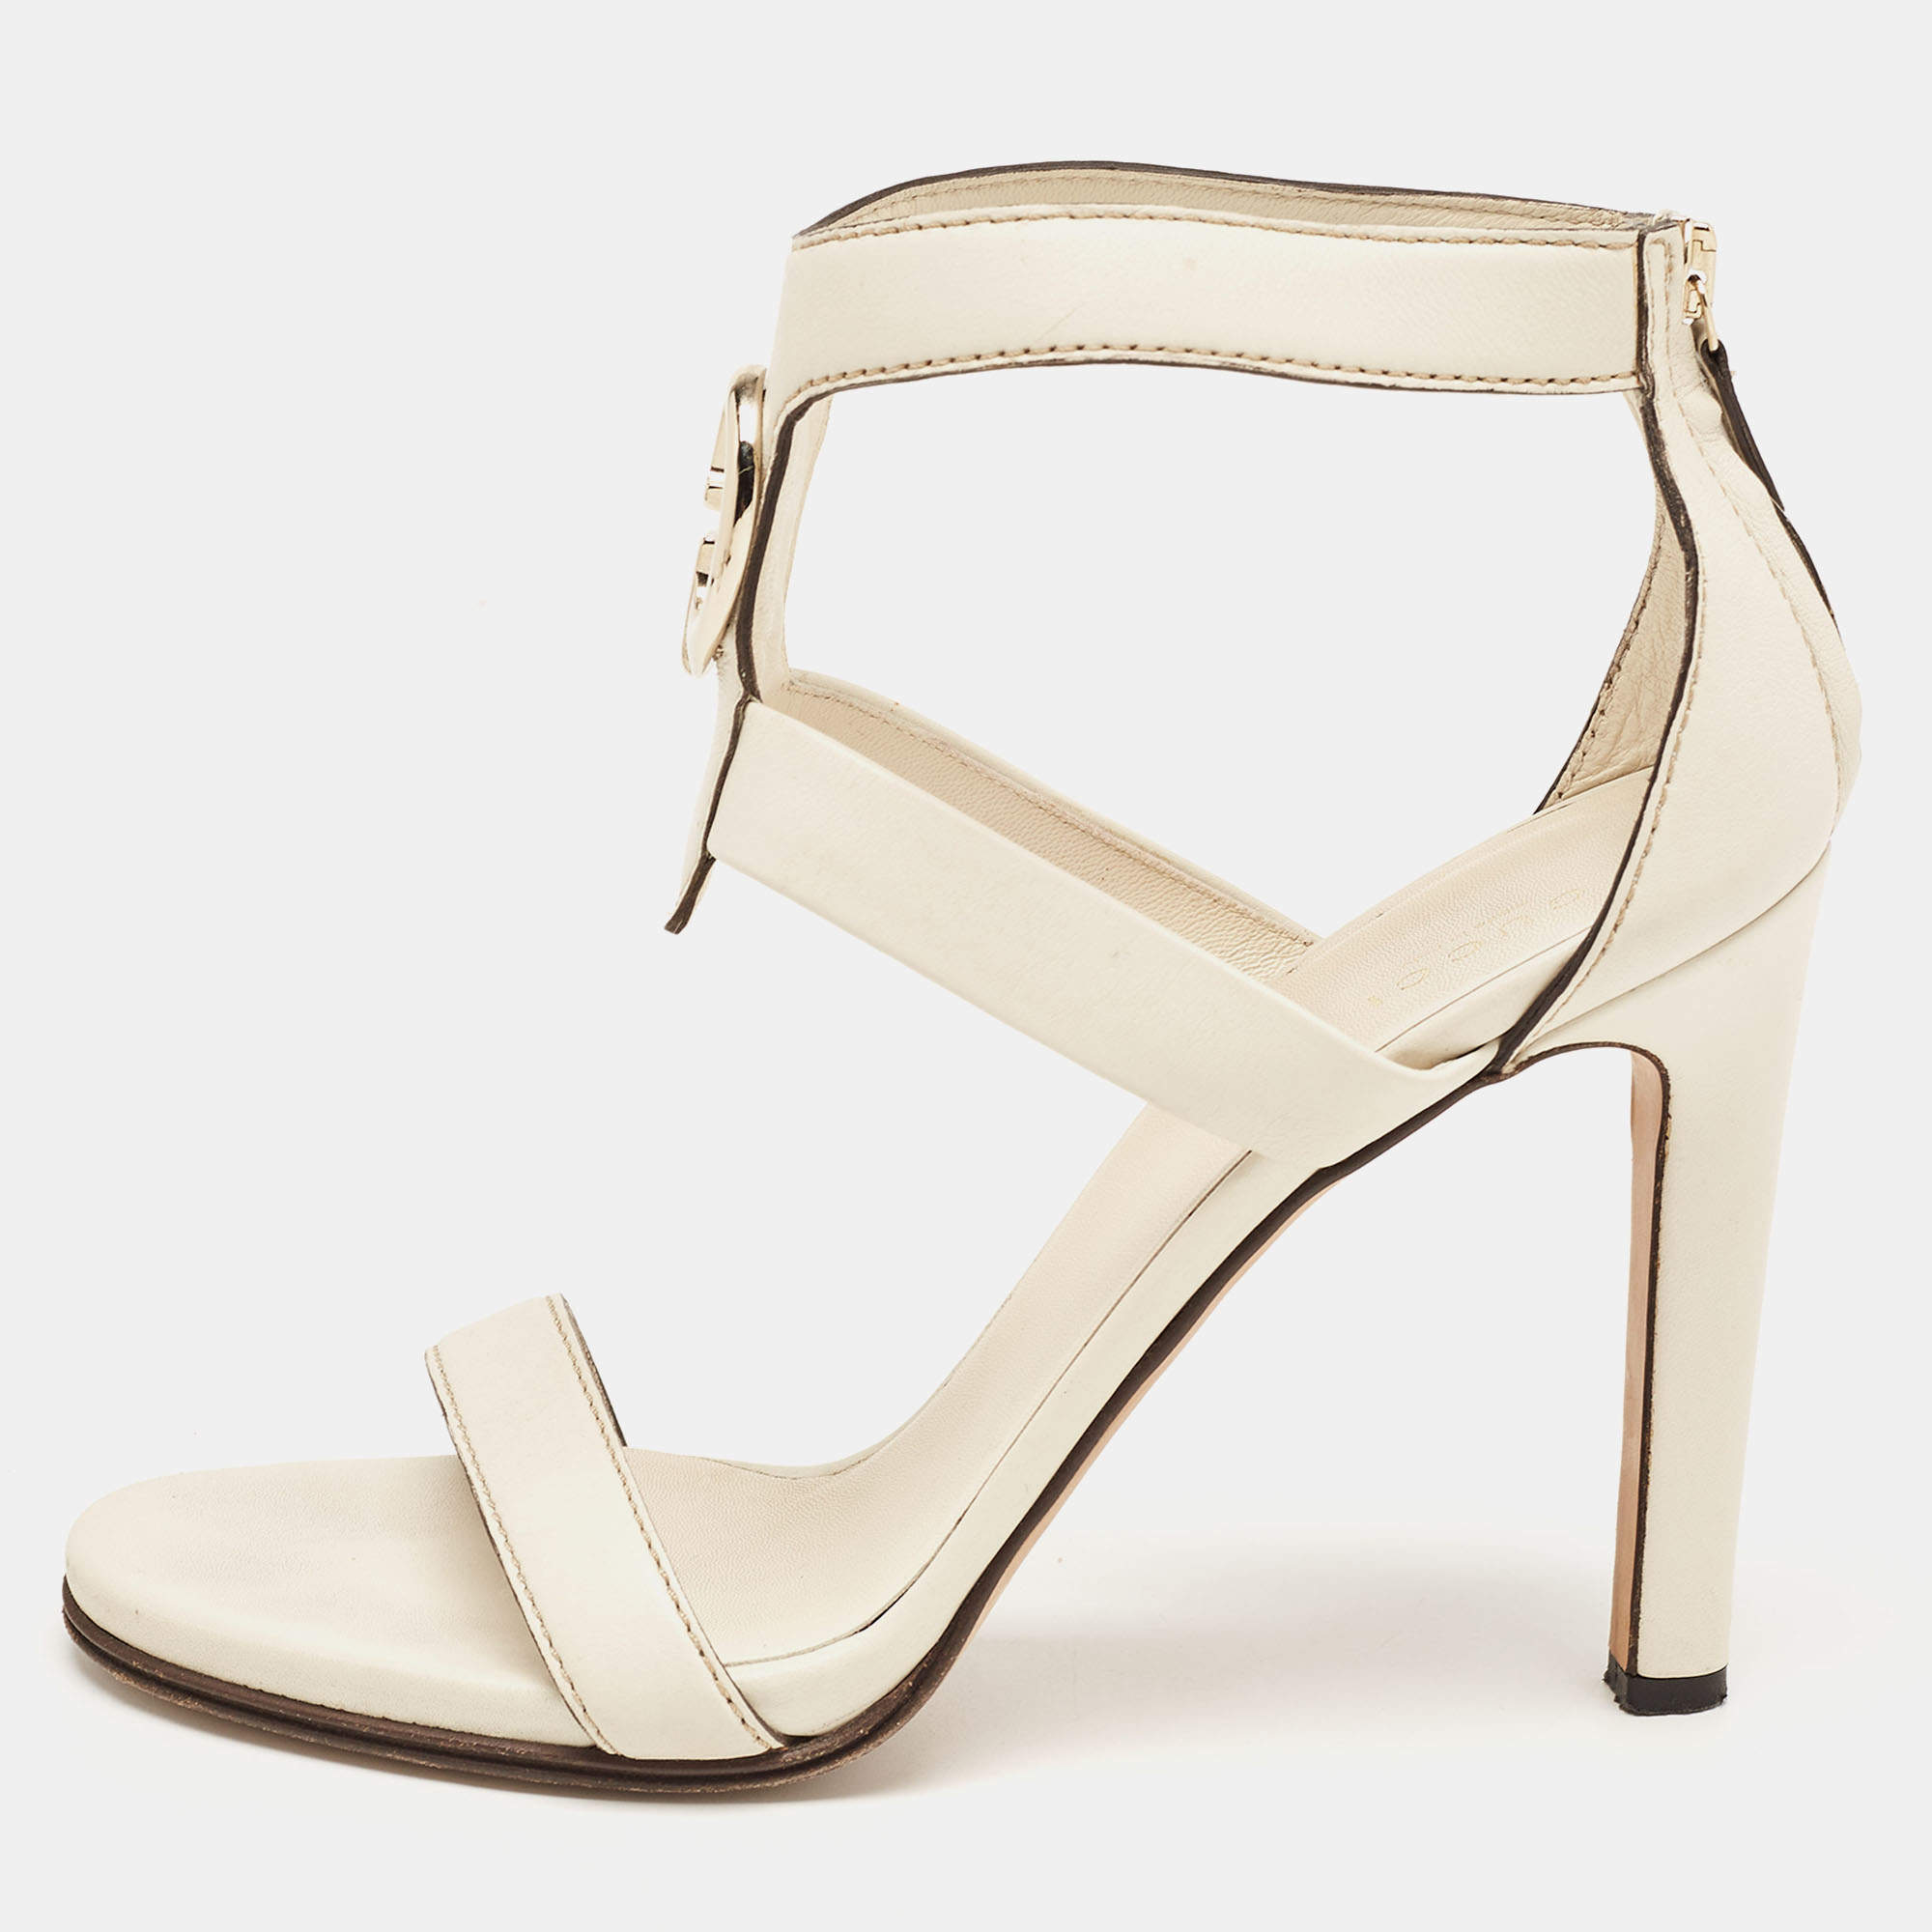 Gucci Off-White Leather Saddle Soft Lux Ankle Cuff Sandals Size 40